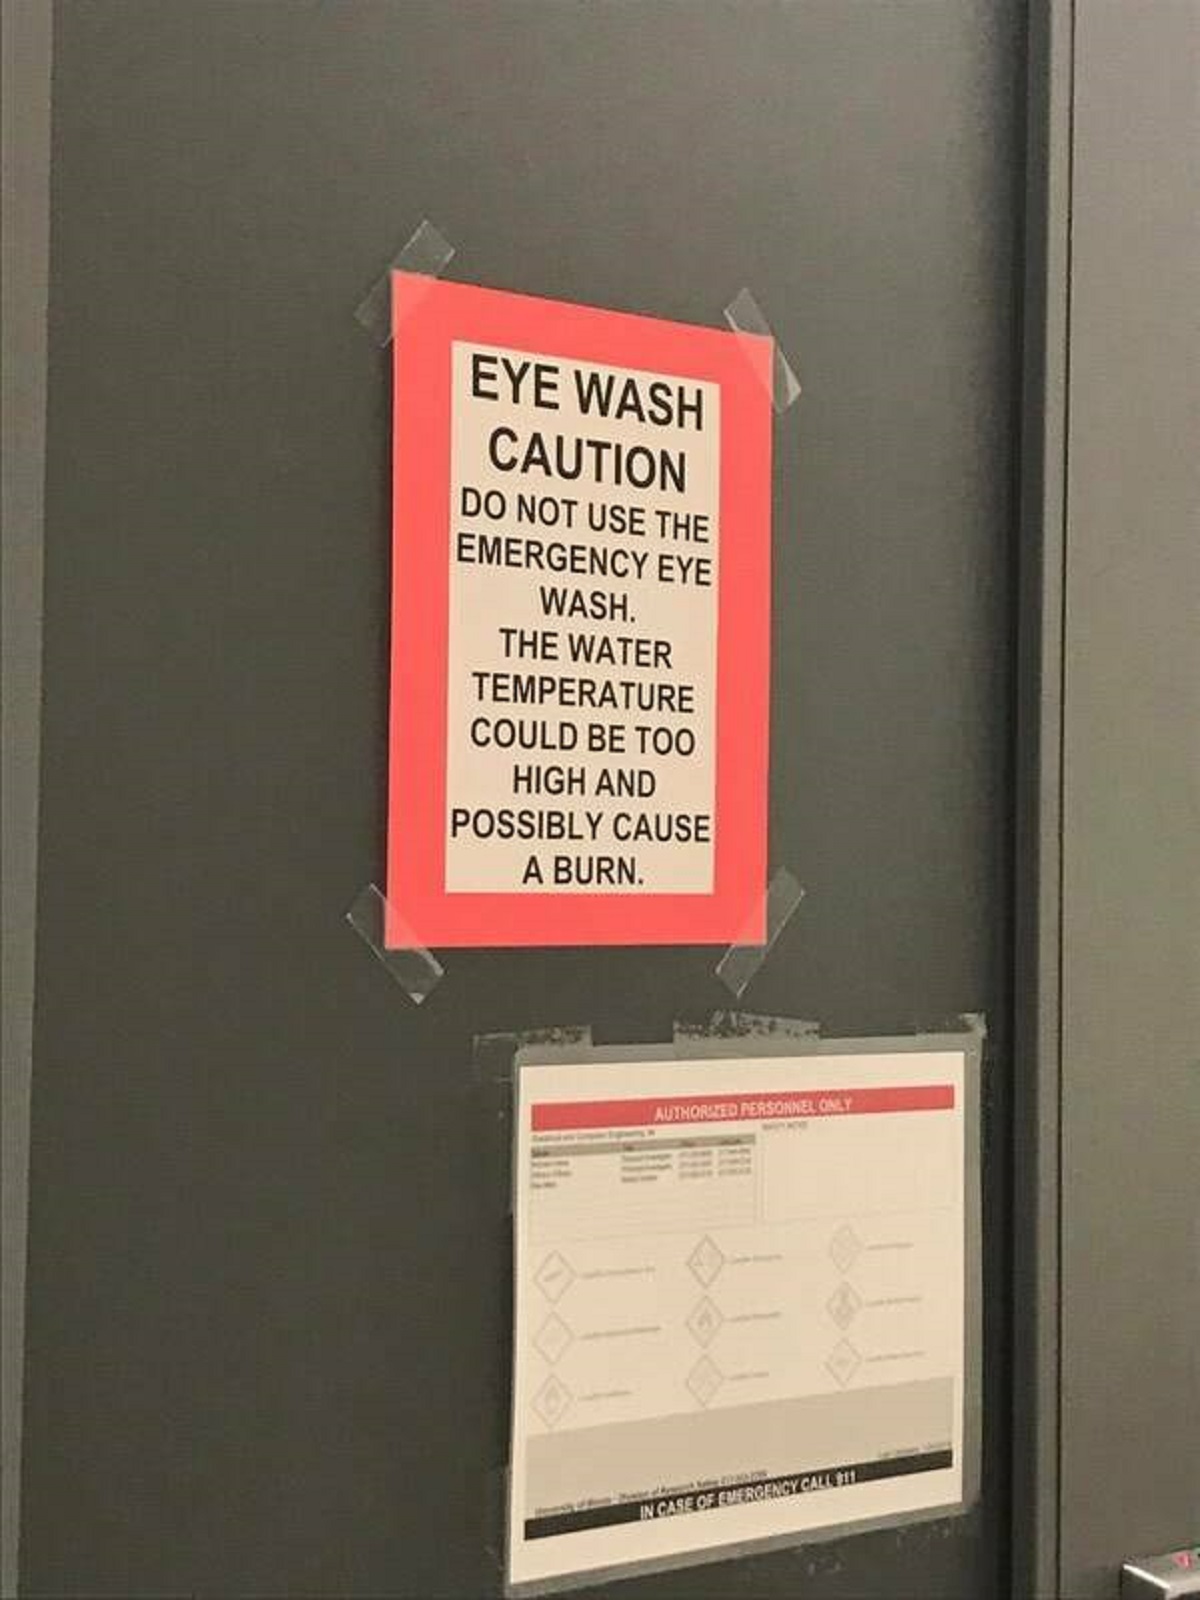 “Found in a graduate electrical engineering lab”